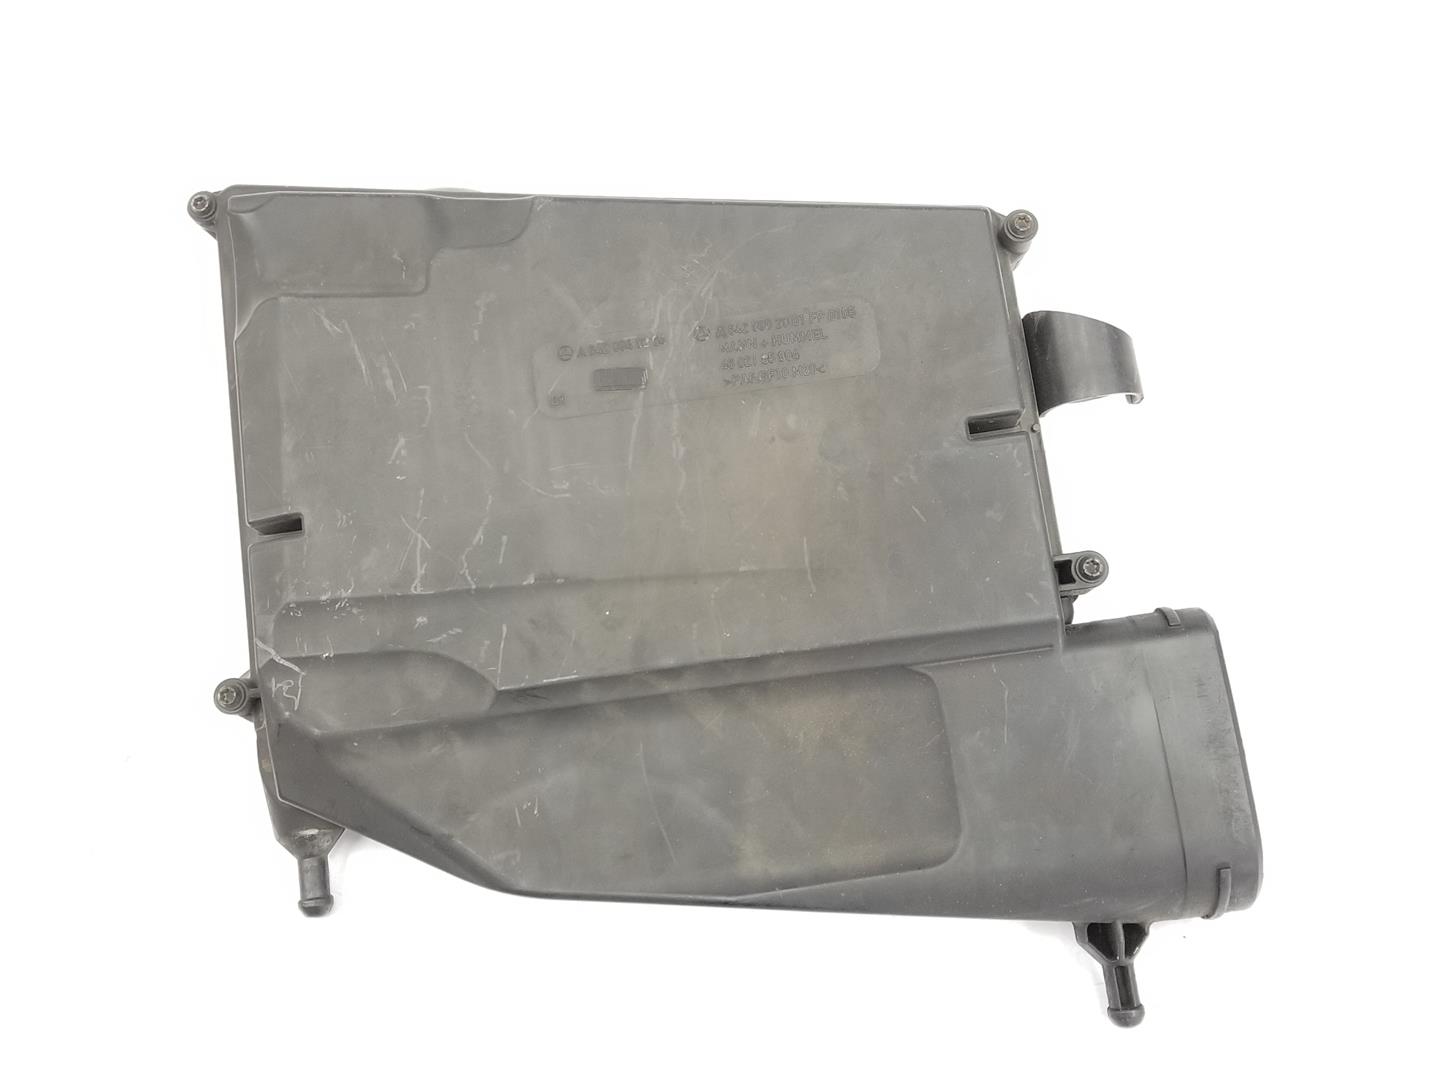 MERCEDES-BENZ S-Class W221 (2005-2013) Other Engine Compartment Parts A6420902001, A6420902001 19939324